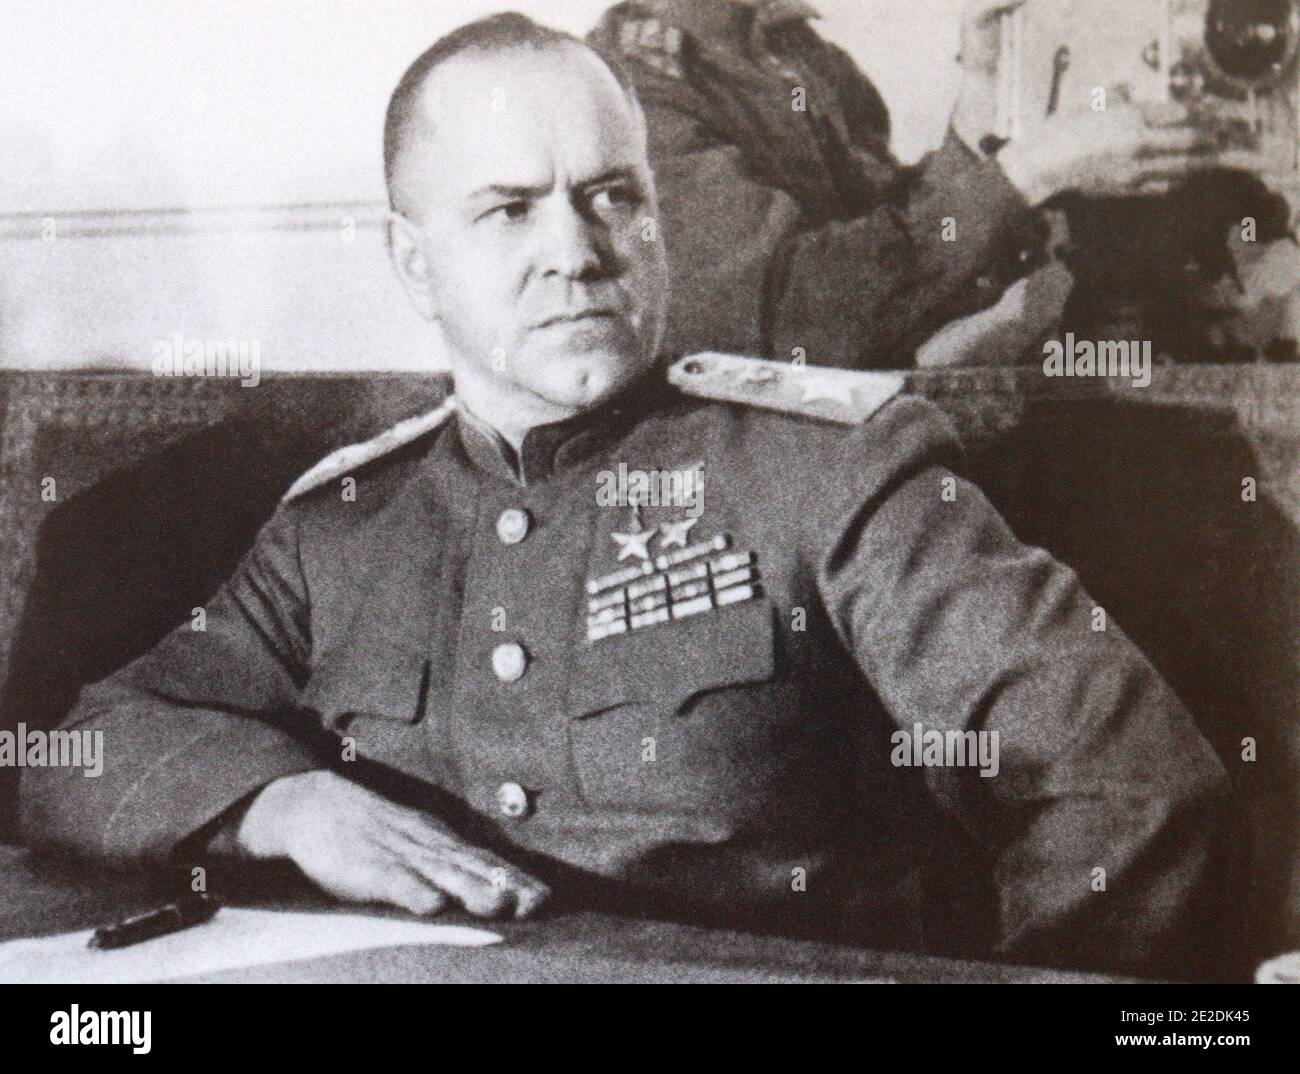 Marshal of the Soviet Union G.K. Zhukov during the signing of the act of unconditional surrender of Germany. Berlin, May 8, 1945. Stock Photo